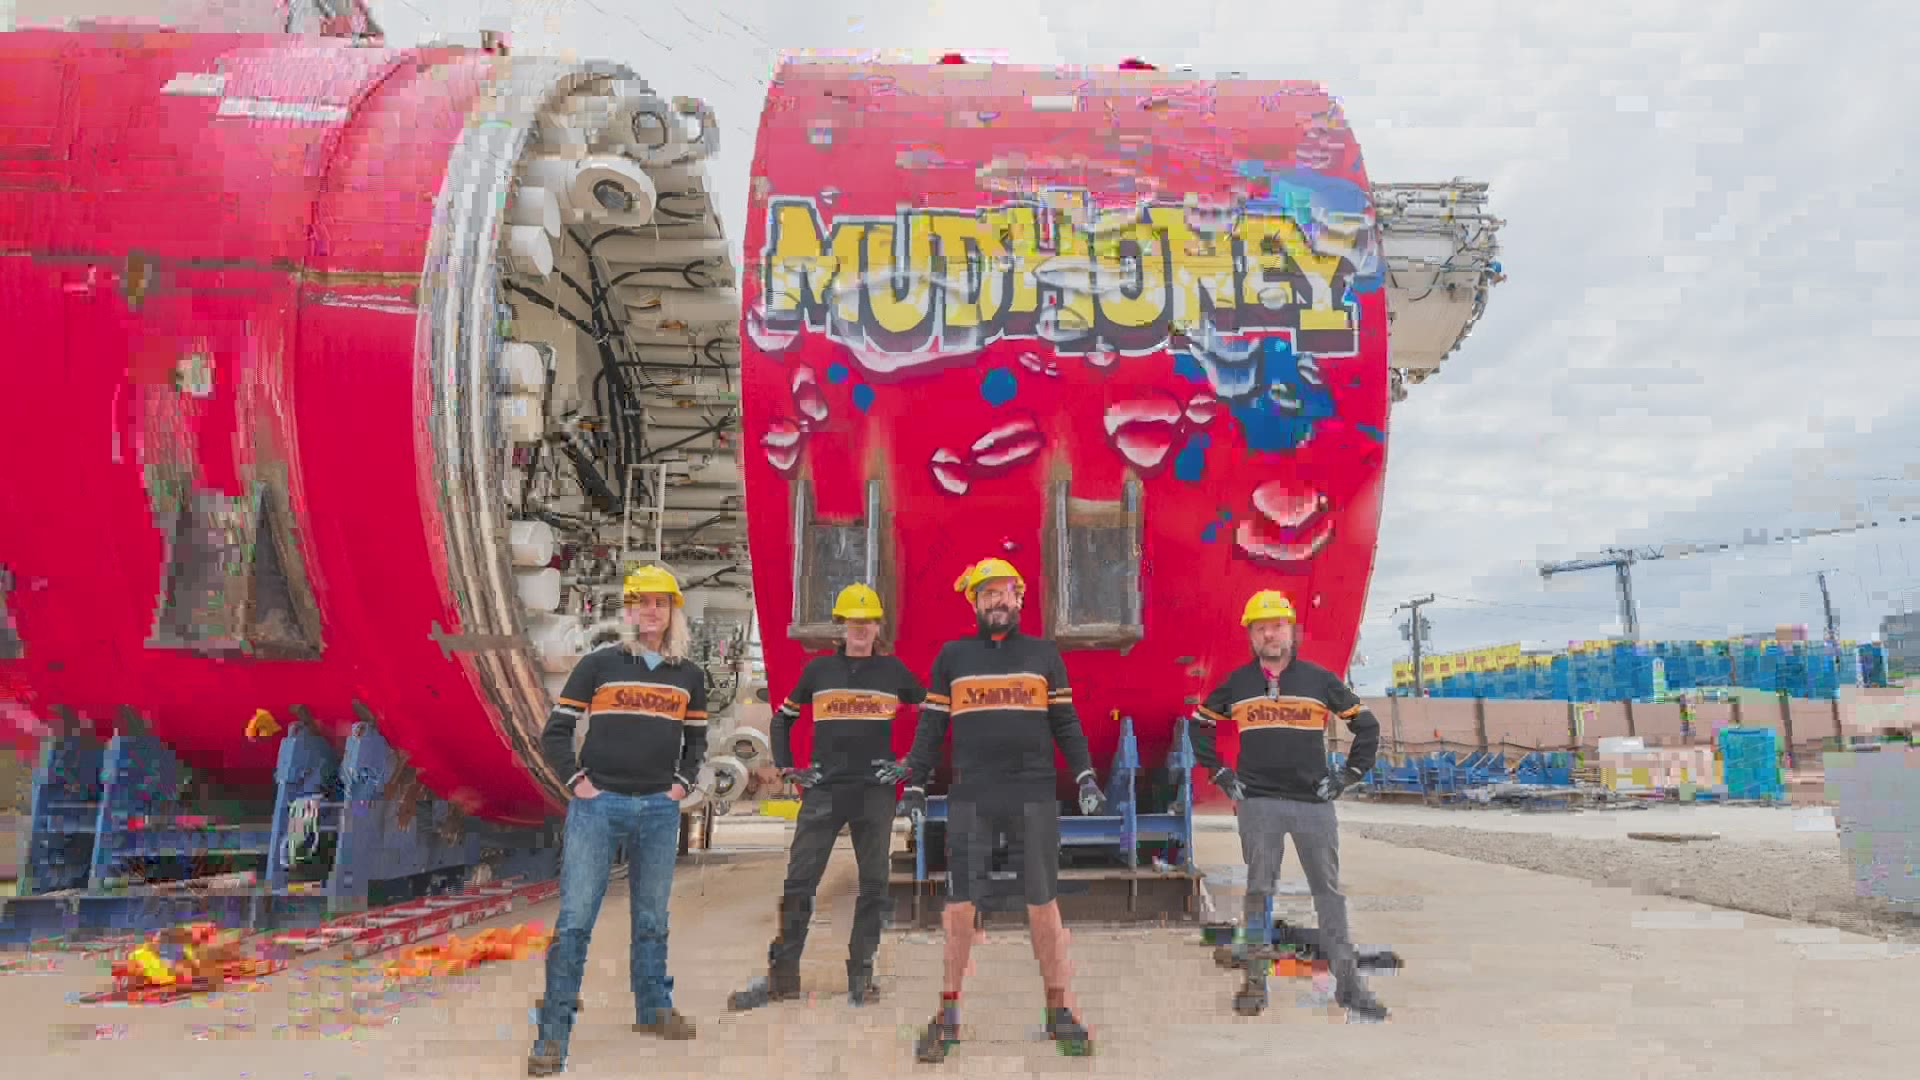 The public voted on five choices for the tunnel boring machine's name, including Sir Digs-A-Lot, Molly the Mole and the winner, Mudhoney.